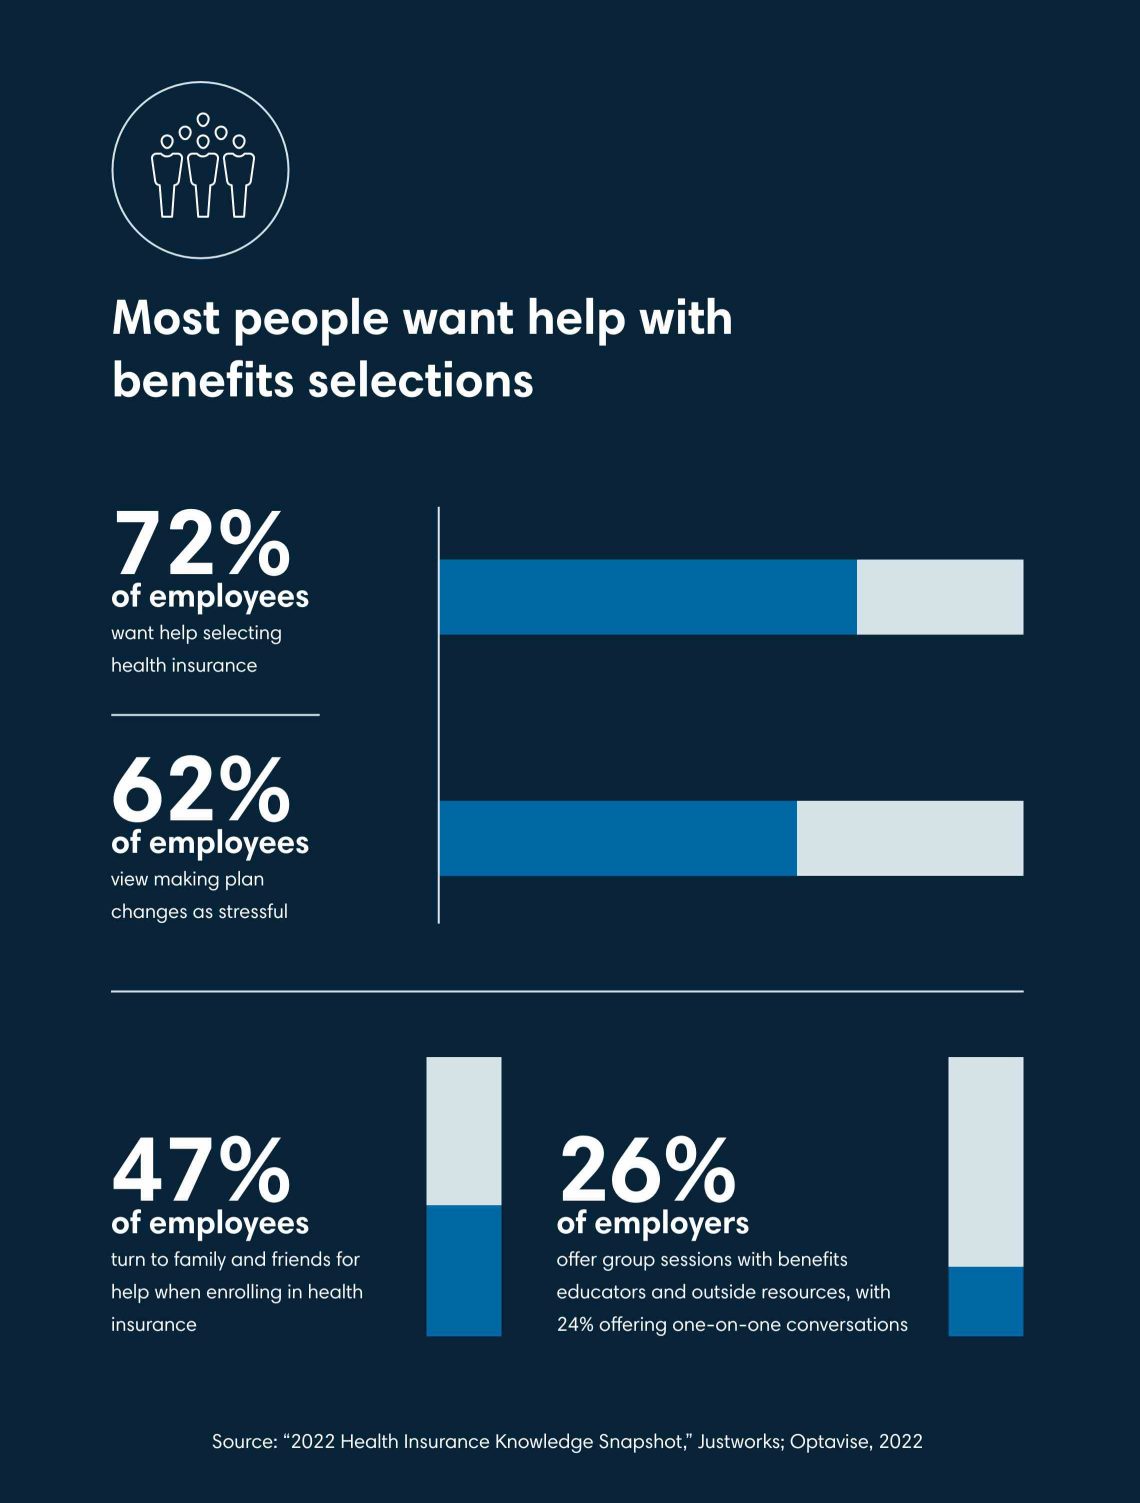 Statistics on workplace benefit selections, according to a 2022 Health Insurance Knowledge Snapshot from Justworks and Optavise